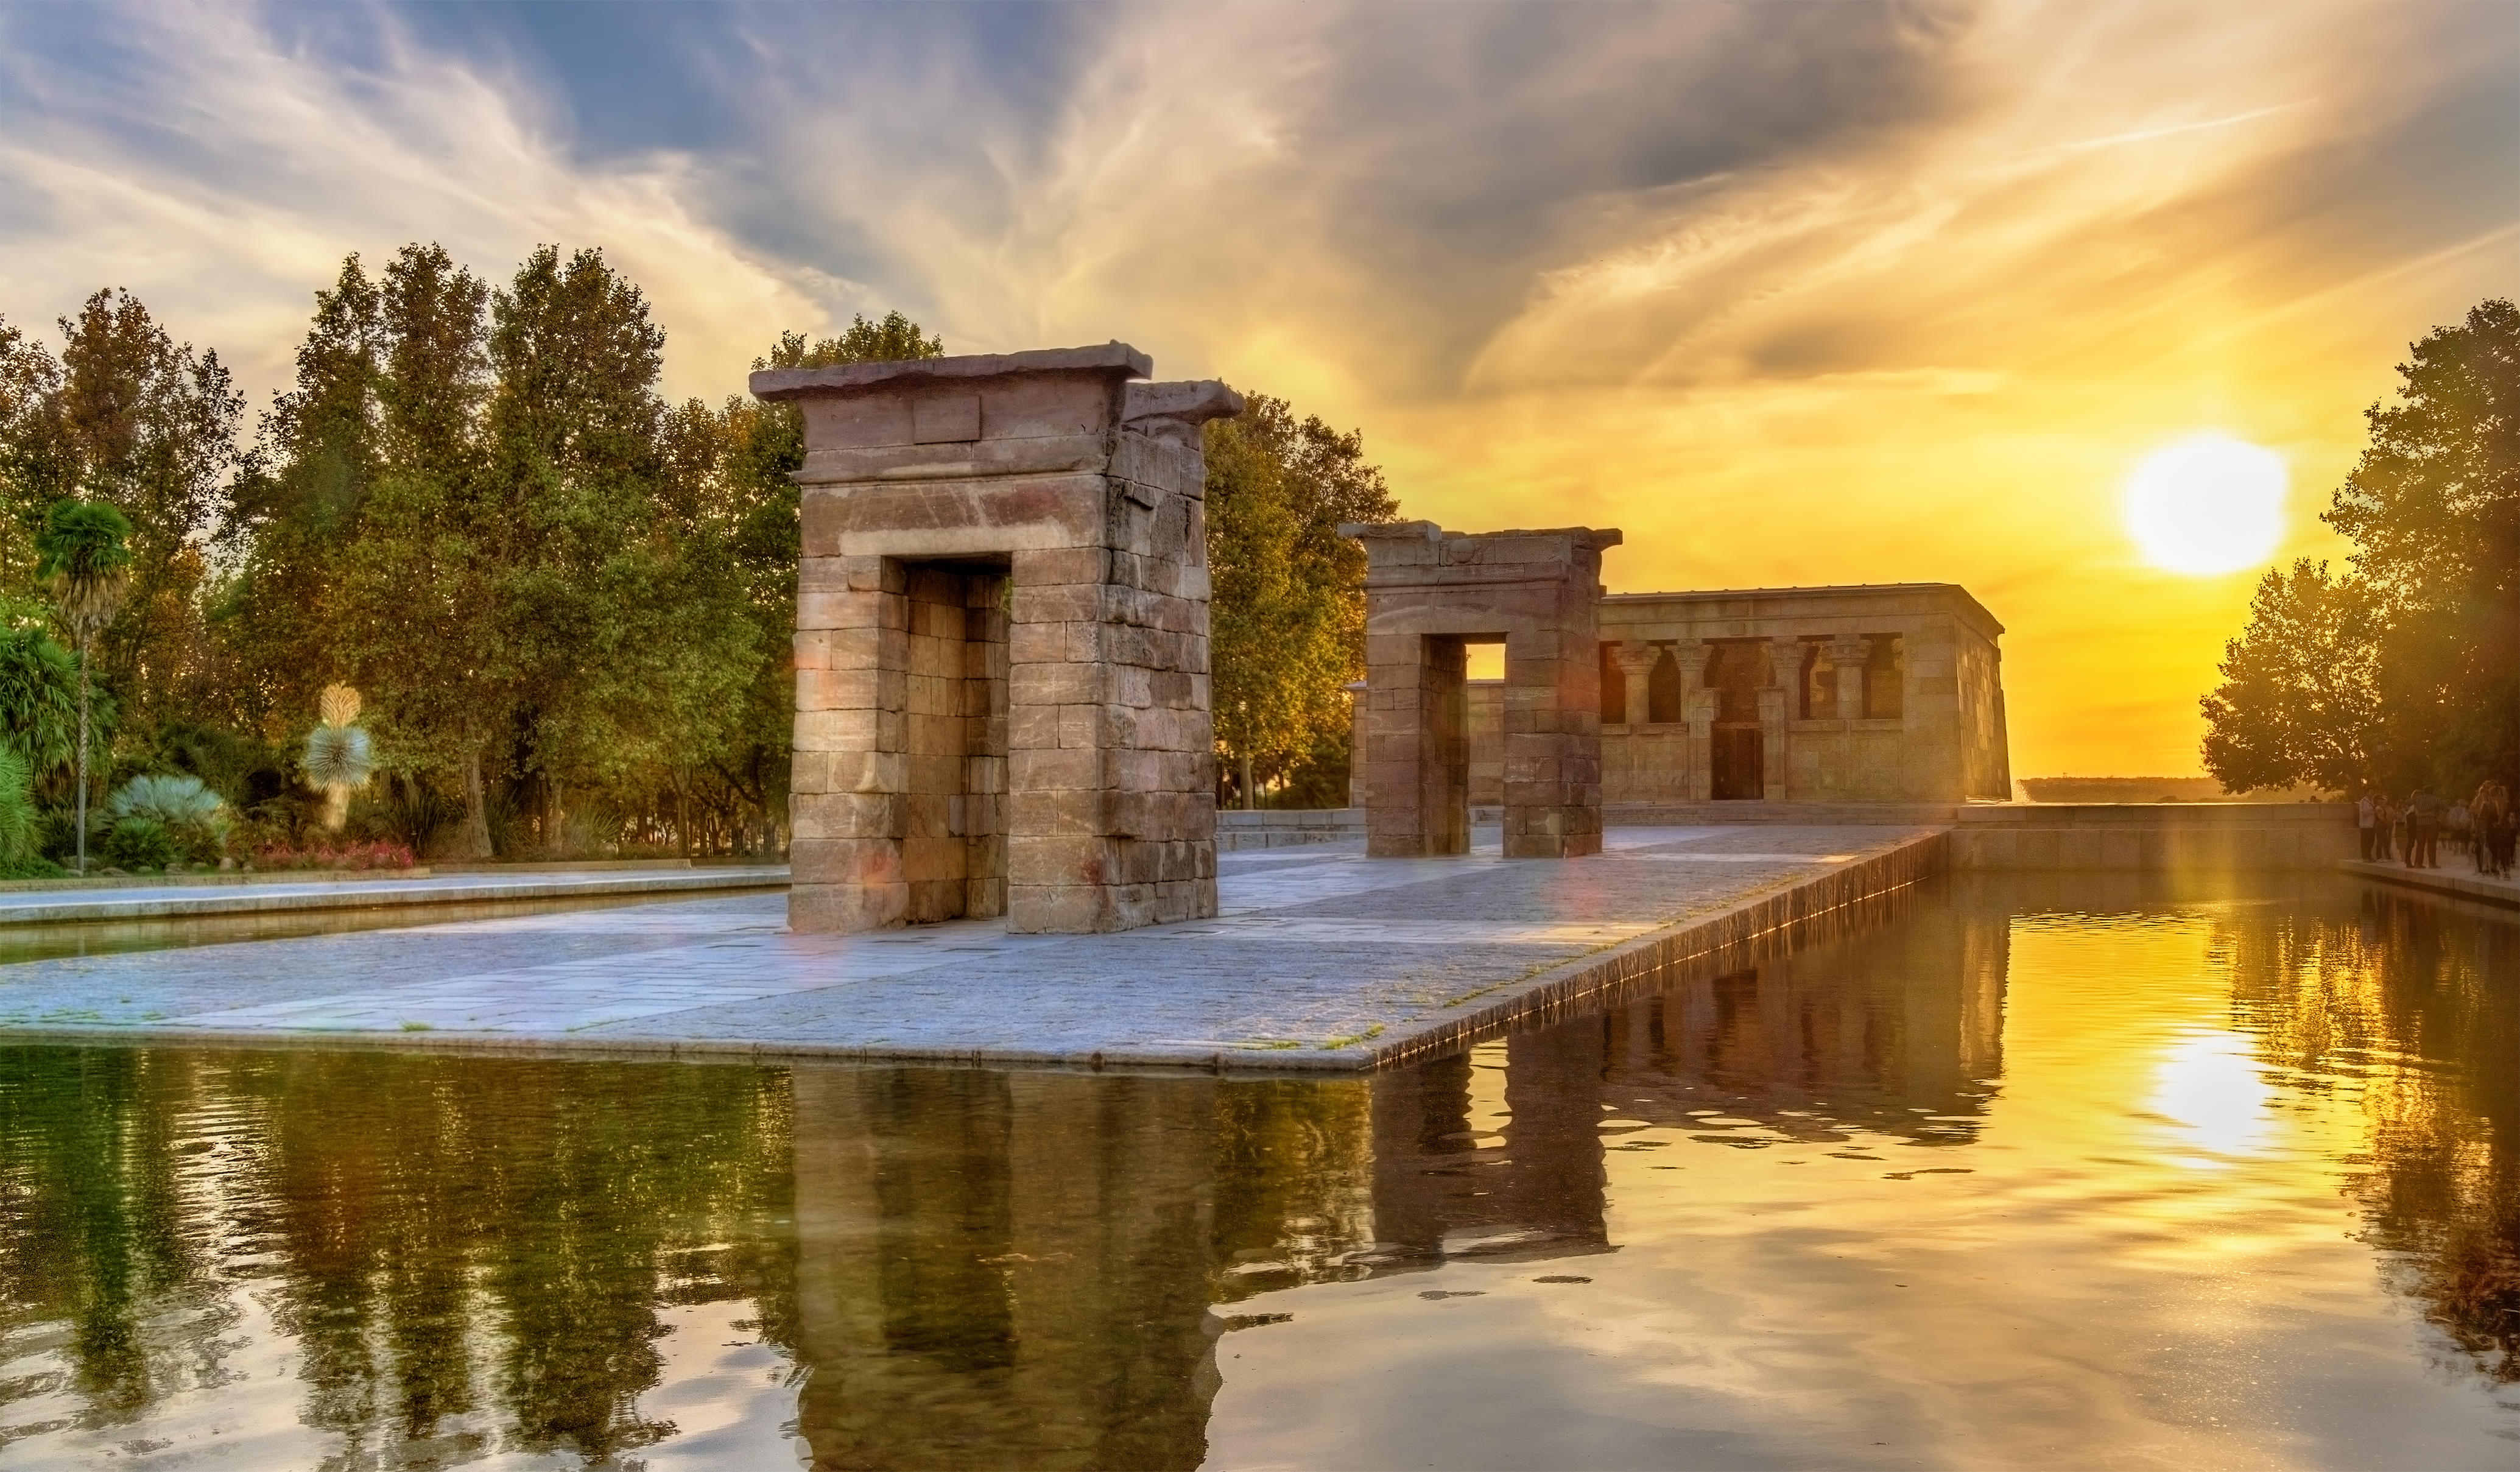 Temple of Debod near Royal Palace of Madrid